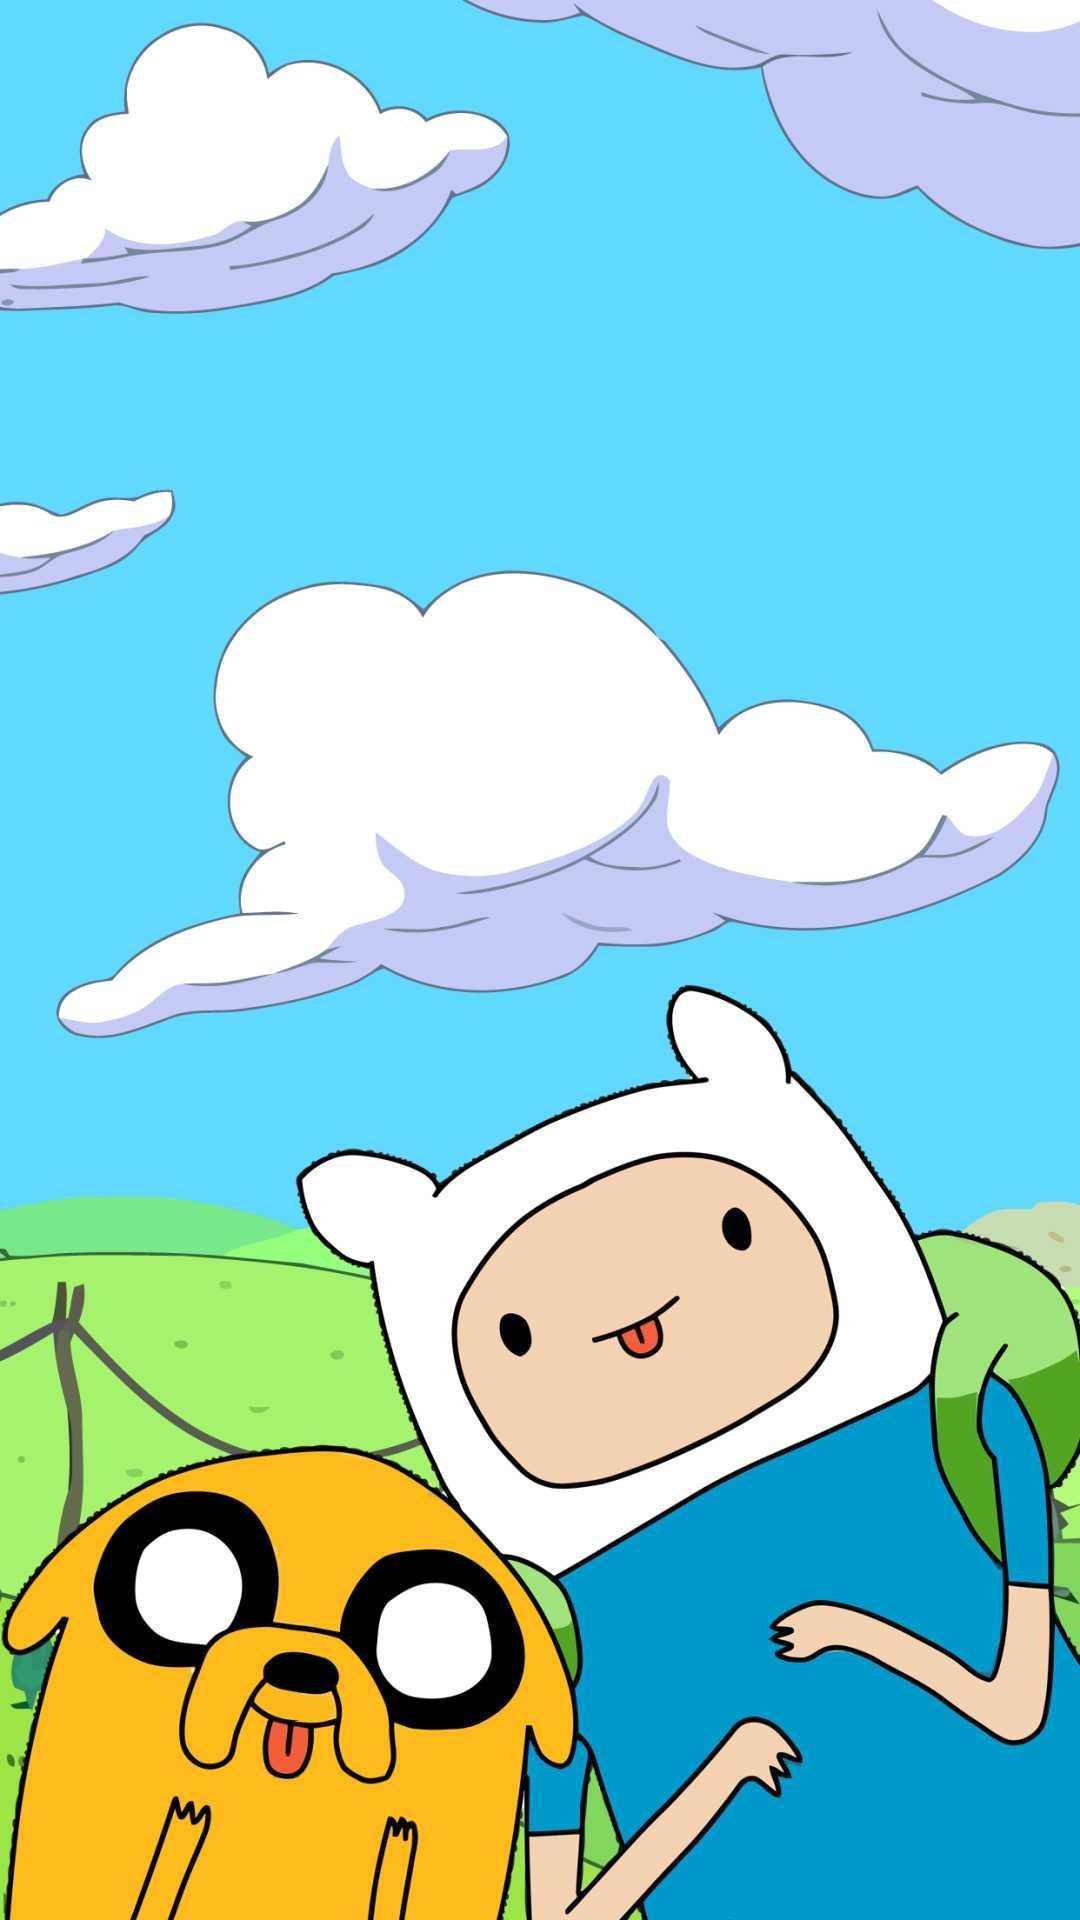 Adventure Time wallpaper, Anime style, Finn and Jake, Jake the dog, 1080x1920 Full HD Phone